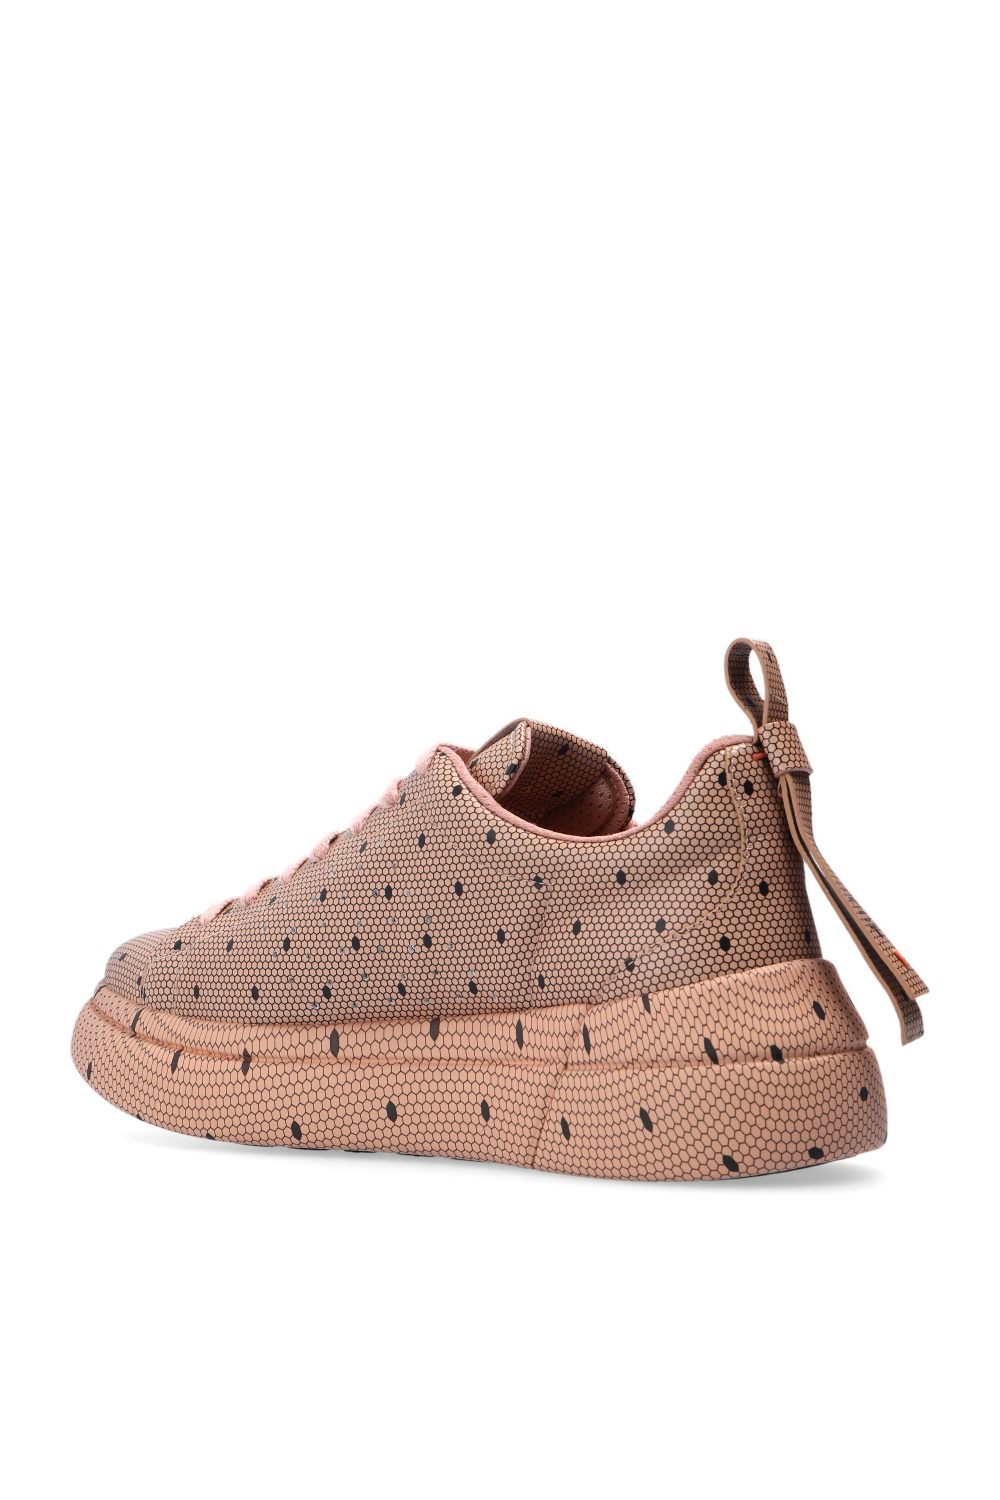 Red Valentino Sneakers | Women's Shoes | Vitkac